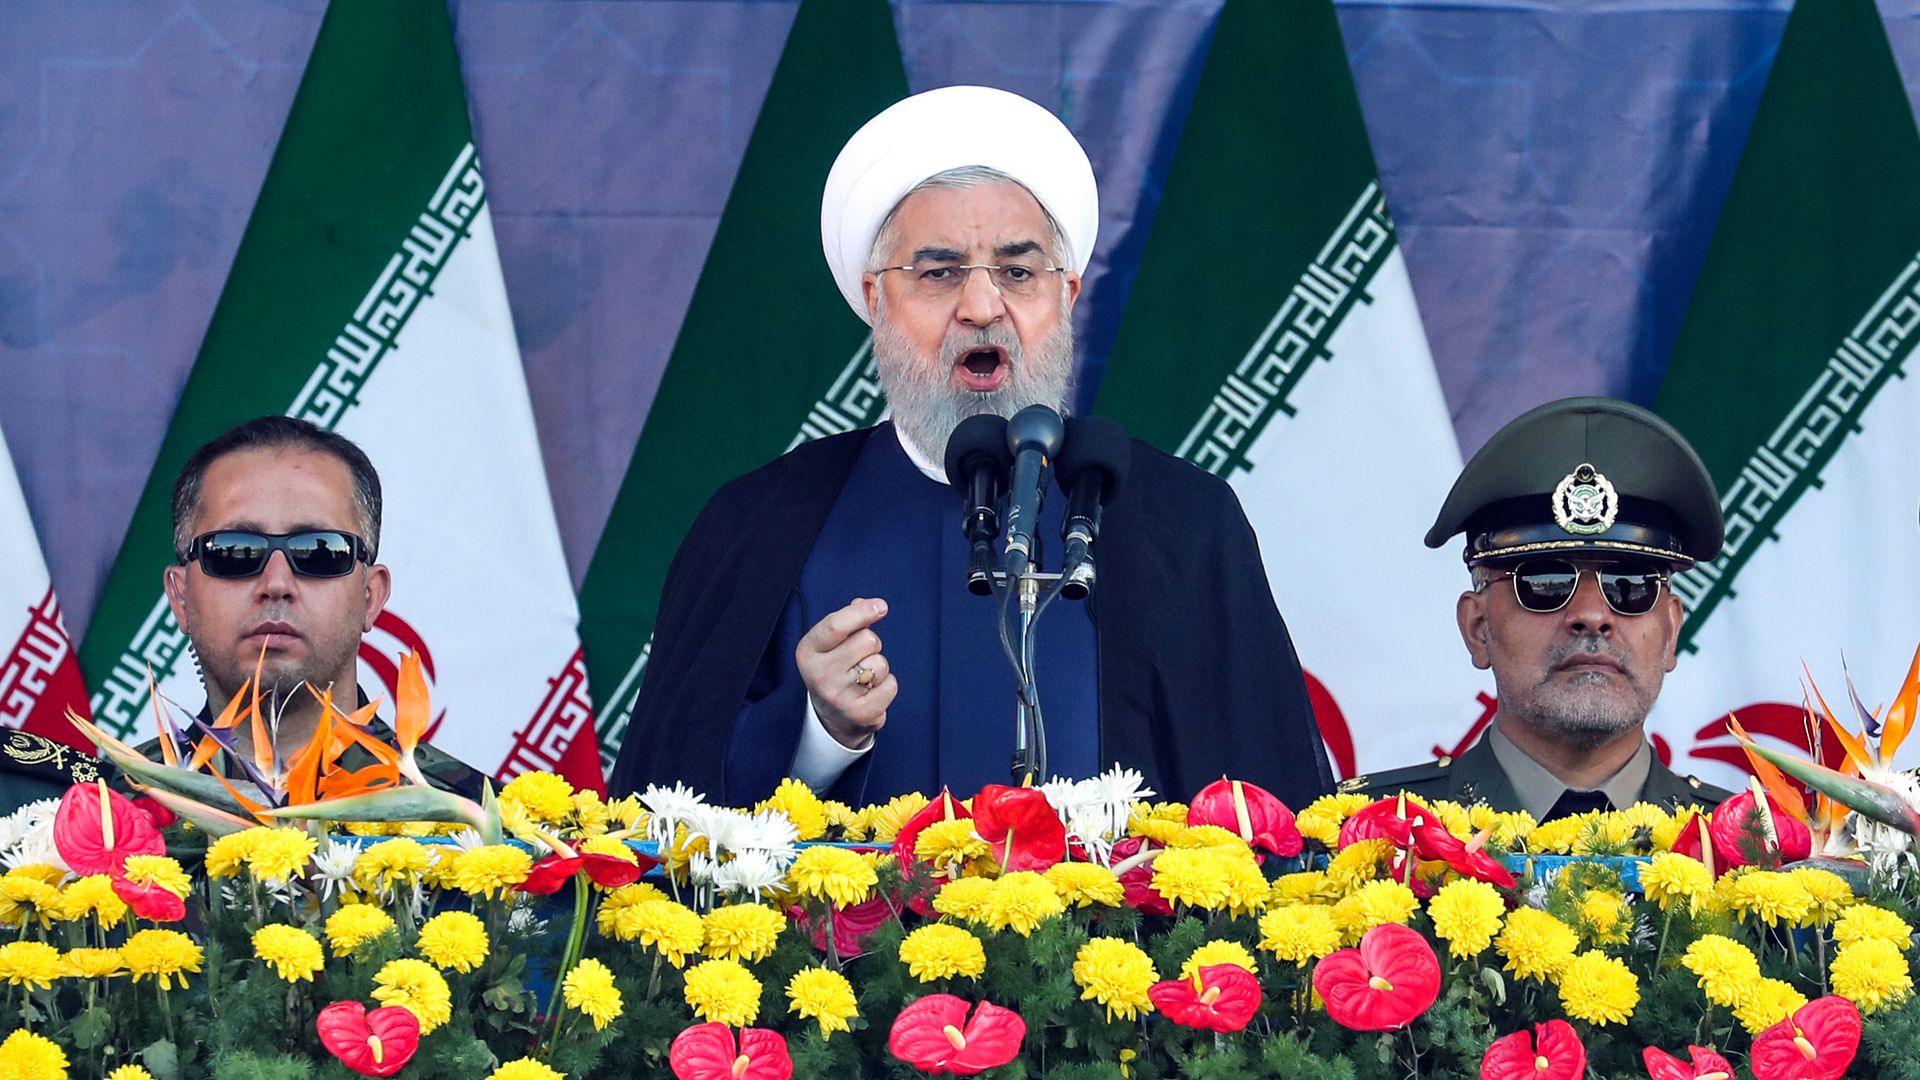 Iranian president giving a speech in front of a bed of flowers